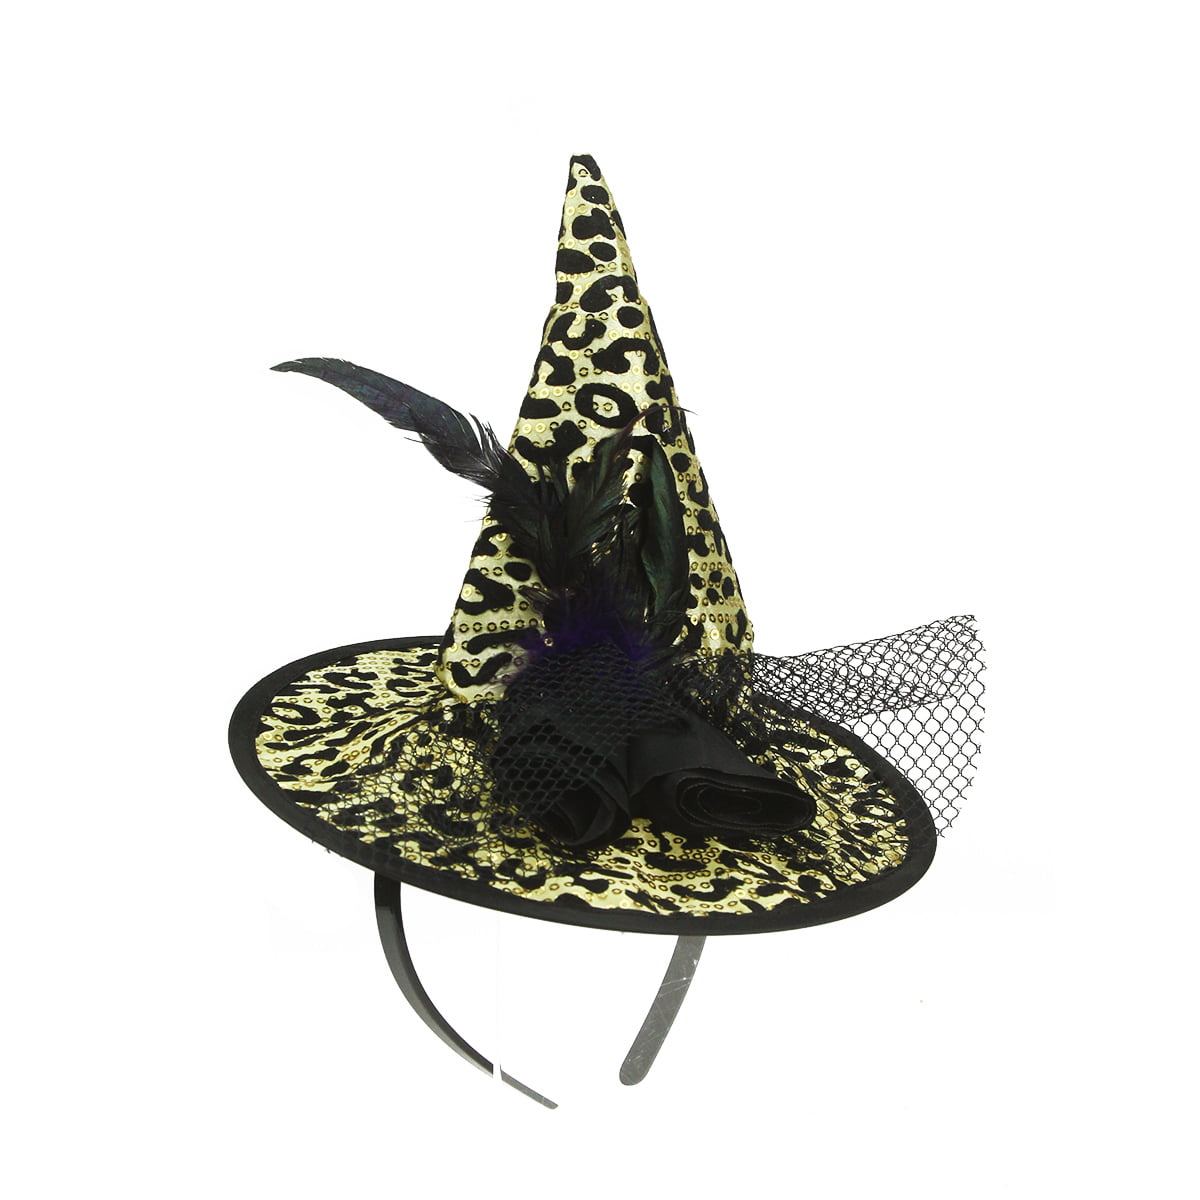 Netting & Spiders Scary Halloween Witch's Black Hat With Feathers 